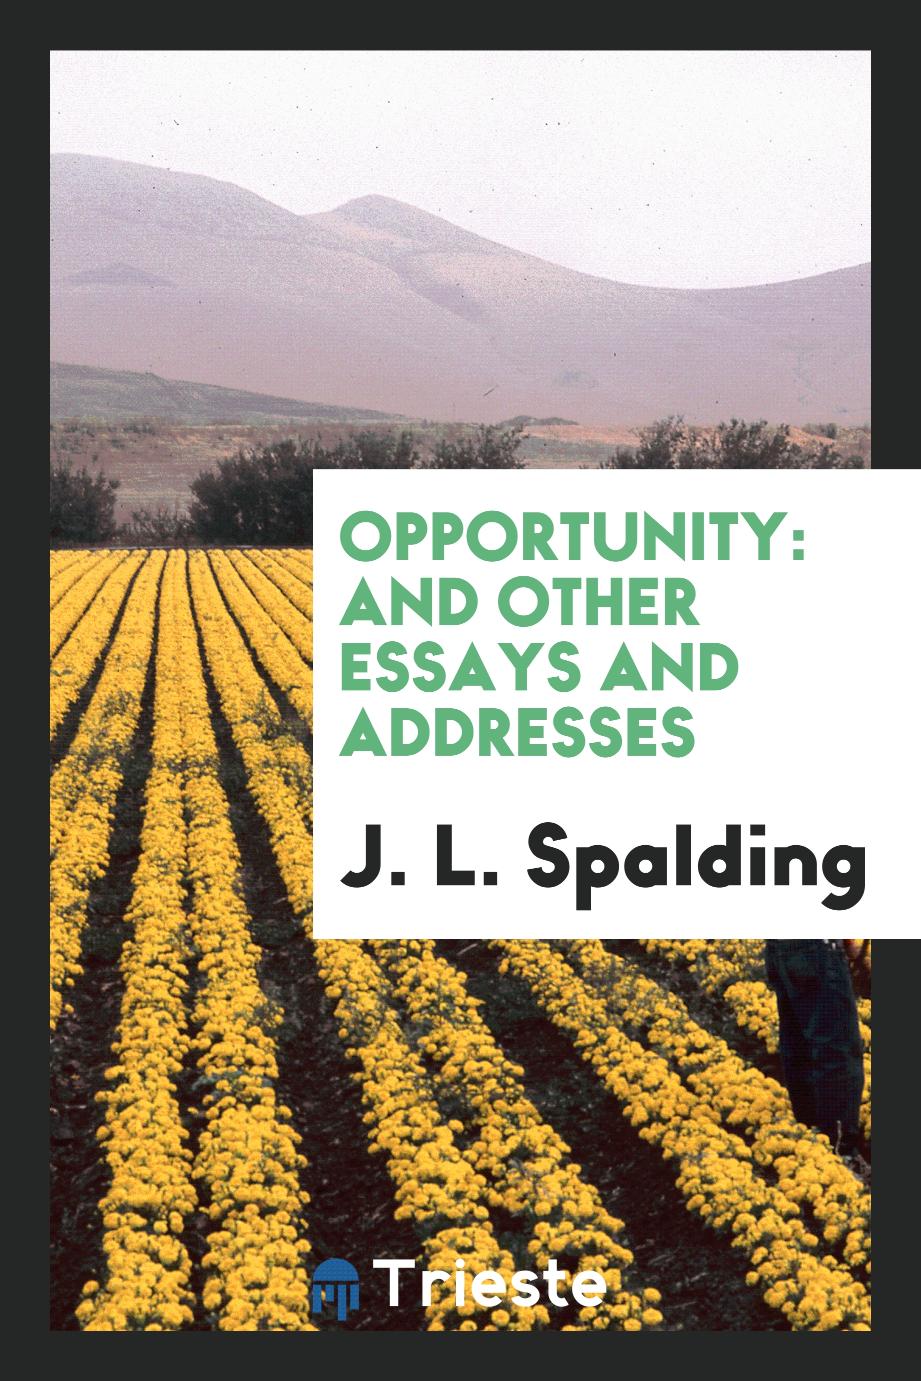 Opportunity: And Other Essays and Addresses